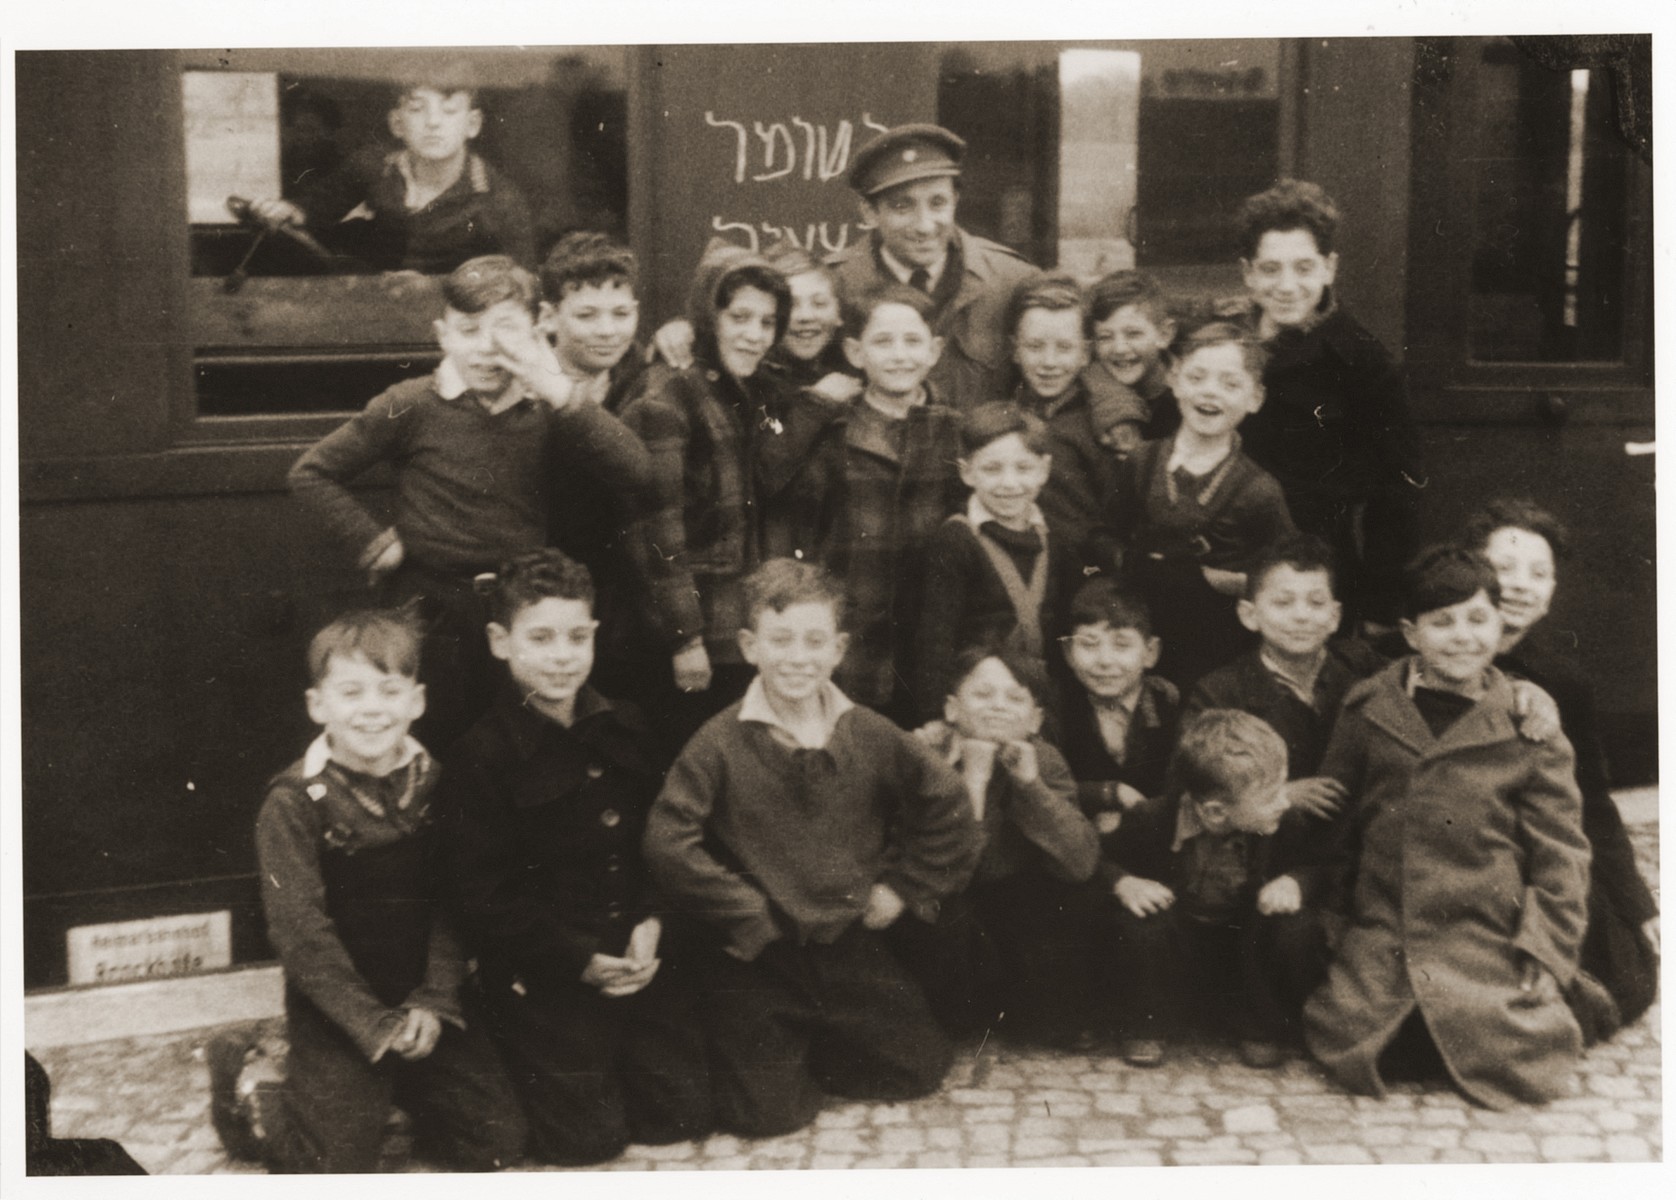 Children from the JDC children's home in Blankenese pose in front of a train in the Bergen-Belsen station before their departure for Palestine.

Chalked on the train in Hebrew are the words, Hashomer Hatzair, the name of a Zionist youth movement.